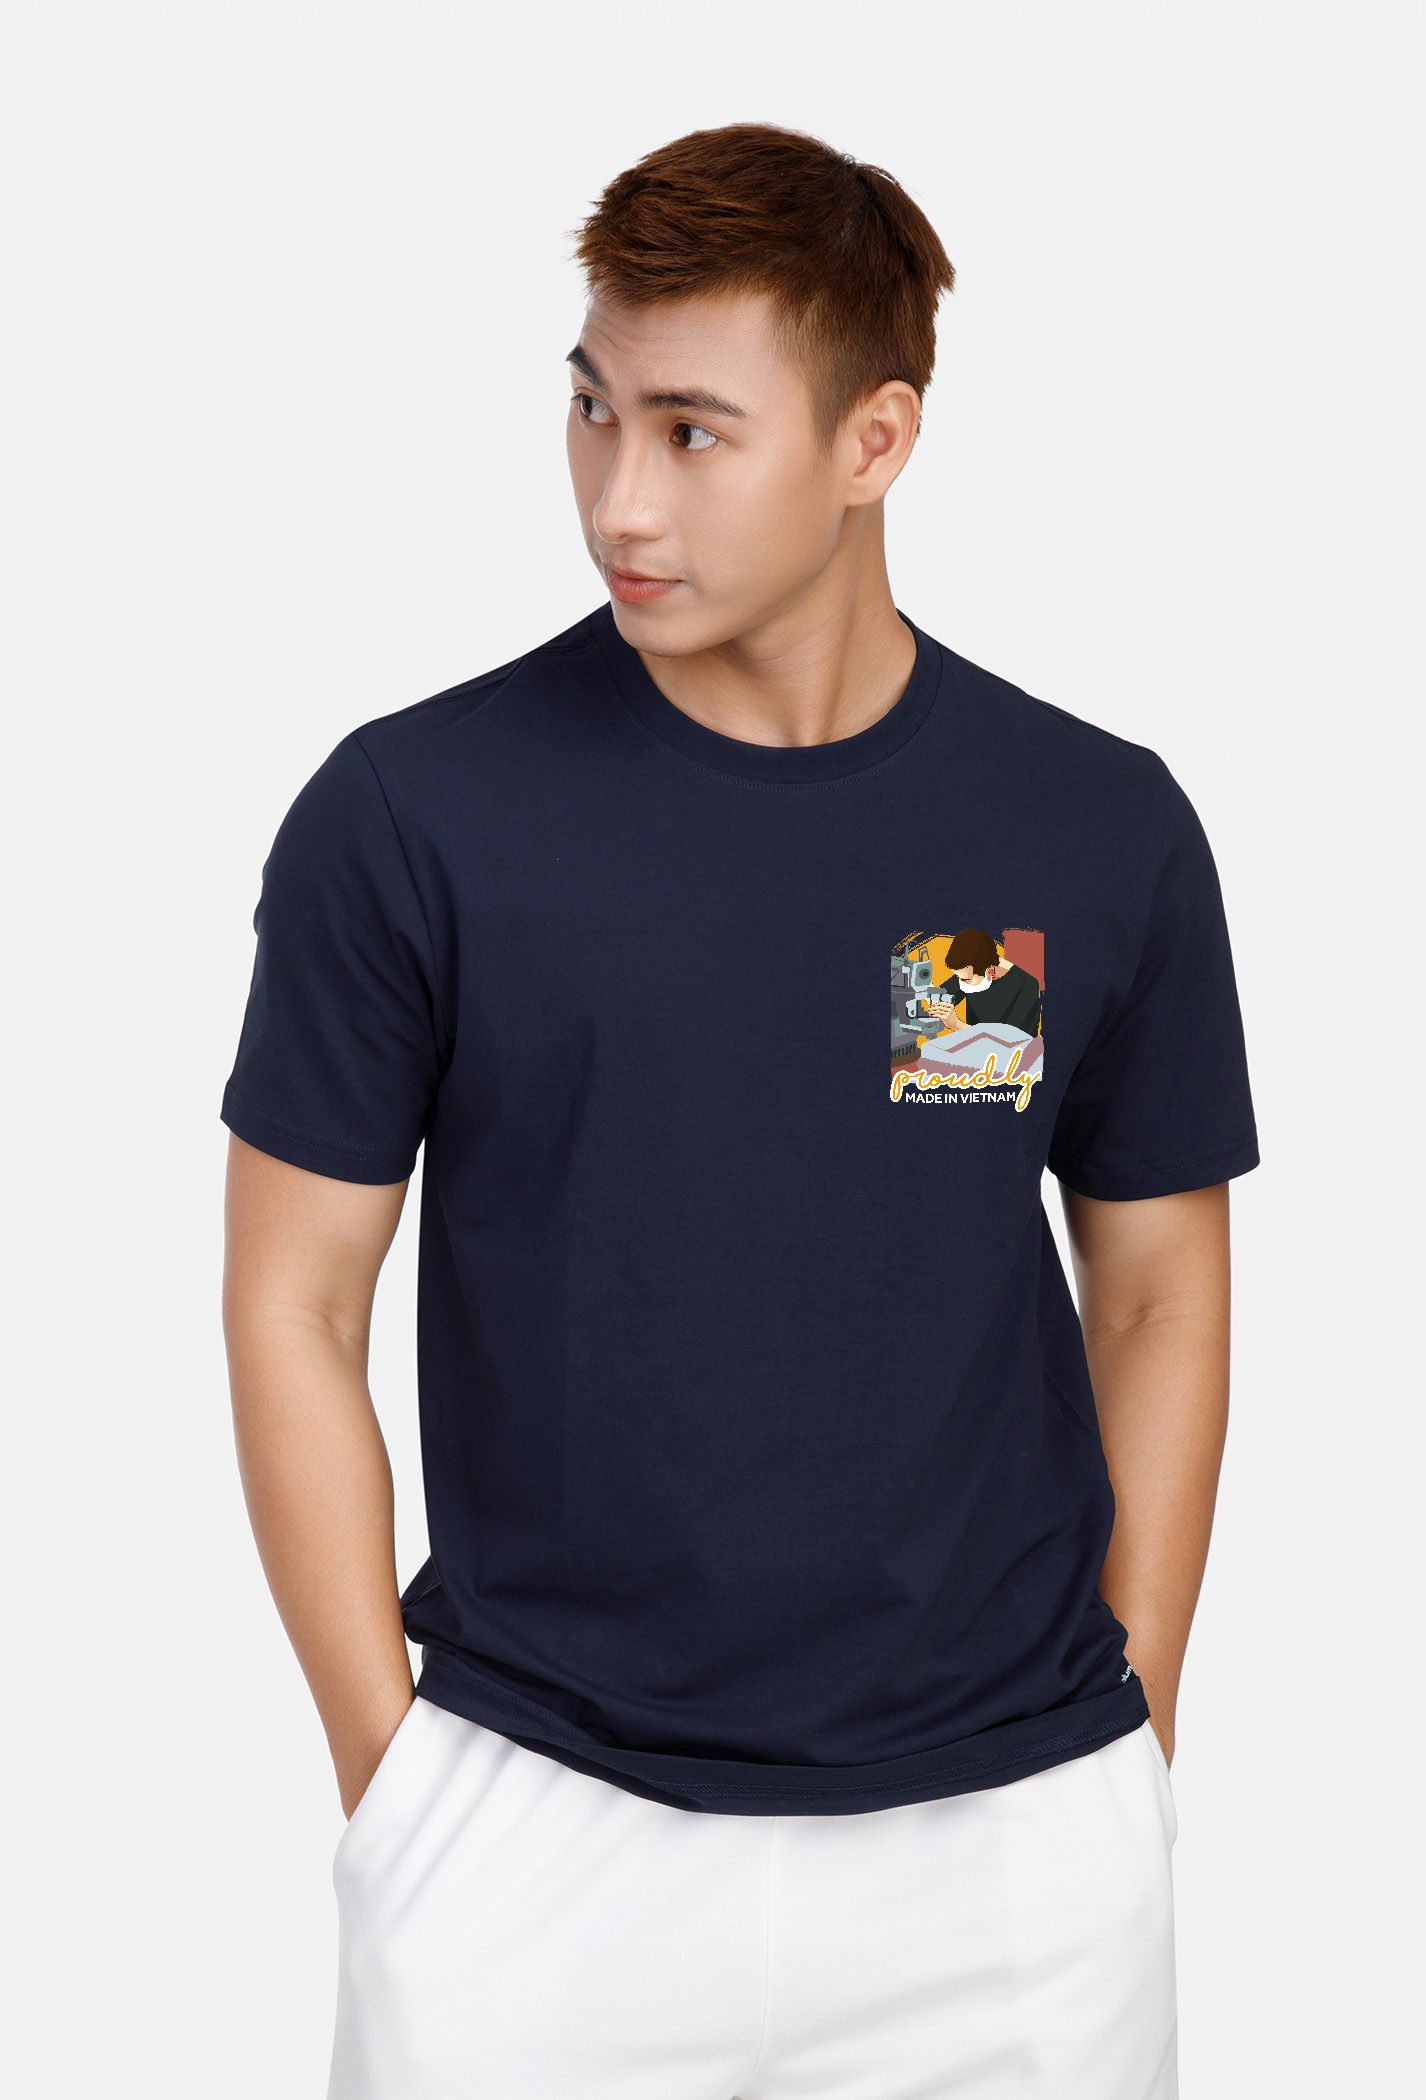  Proudly | Áo thun Cotton Compact "See me: Sawing" in màu xanh-navy 1